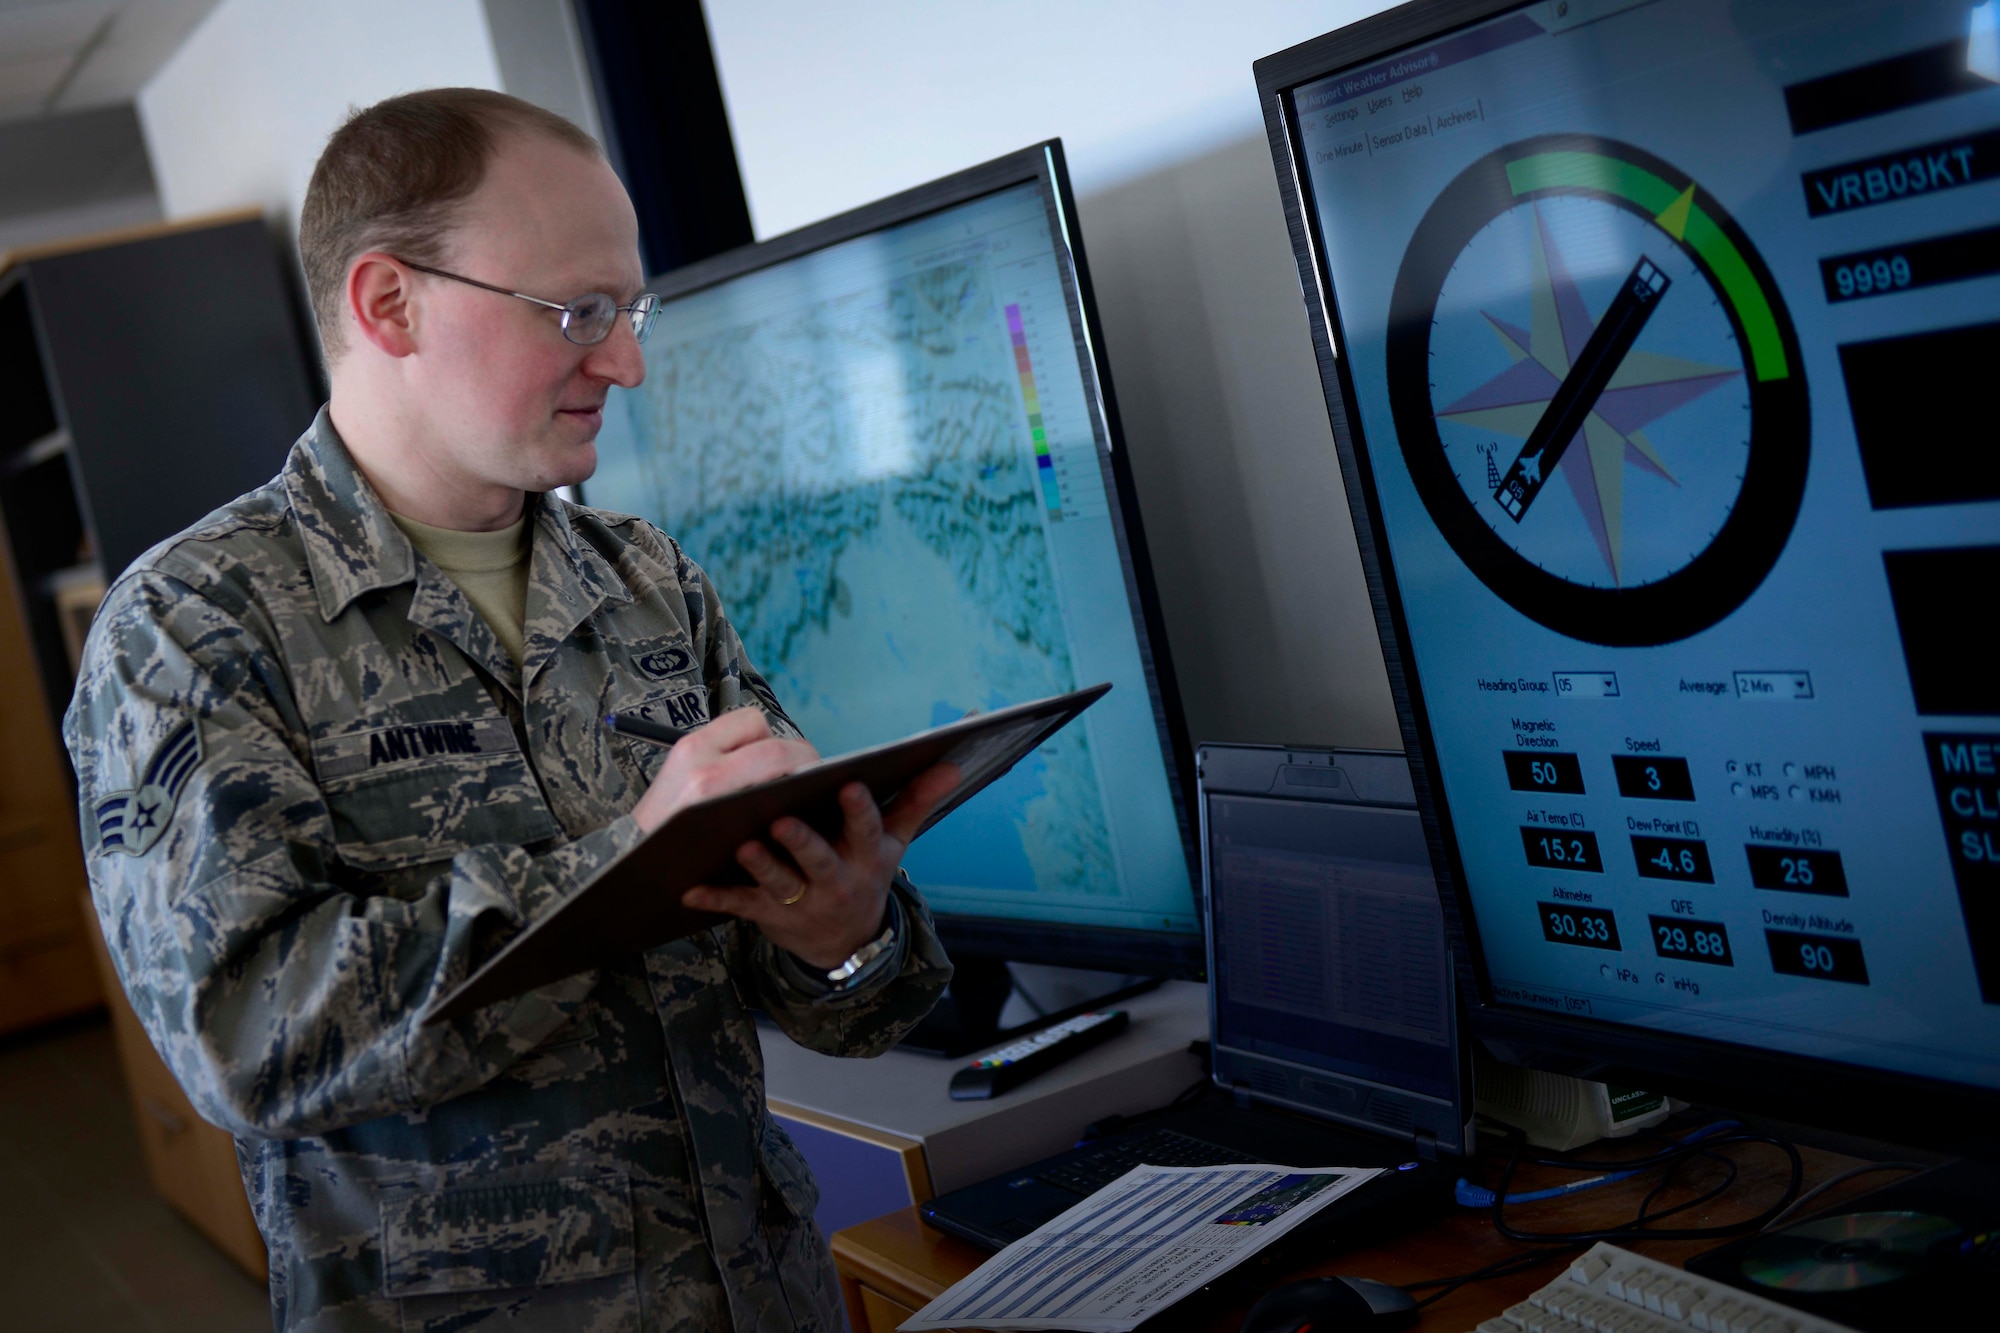 Senior Airman Aaron Antwine, a 31st Operations Support Squadron weather forecaster, observes and records weather conditions, April 8, 2015, at Aviano Air Base, Italy. Weather personnel prepare forecasts, issue weather warnings and brief pilots to ensure flight safety and awareness. (U.S. Air Force photo/Senior Airman Areca T. Wilson)